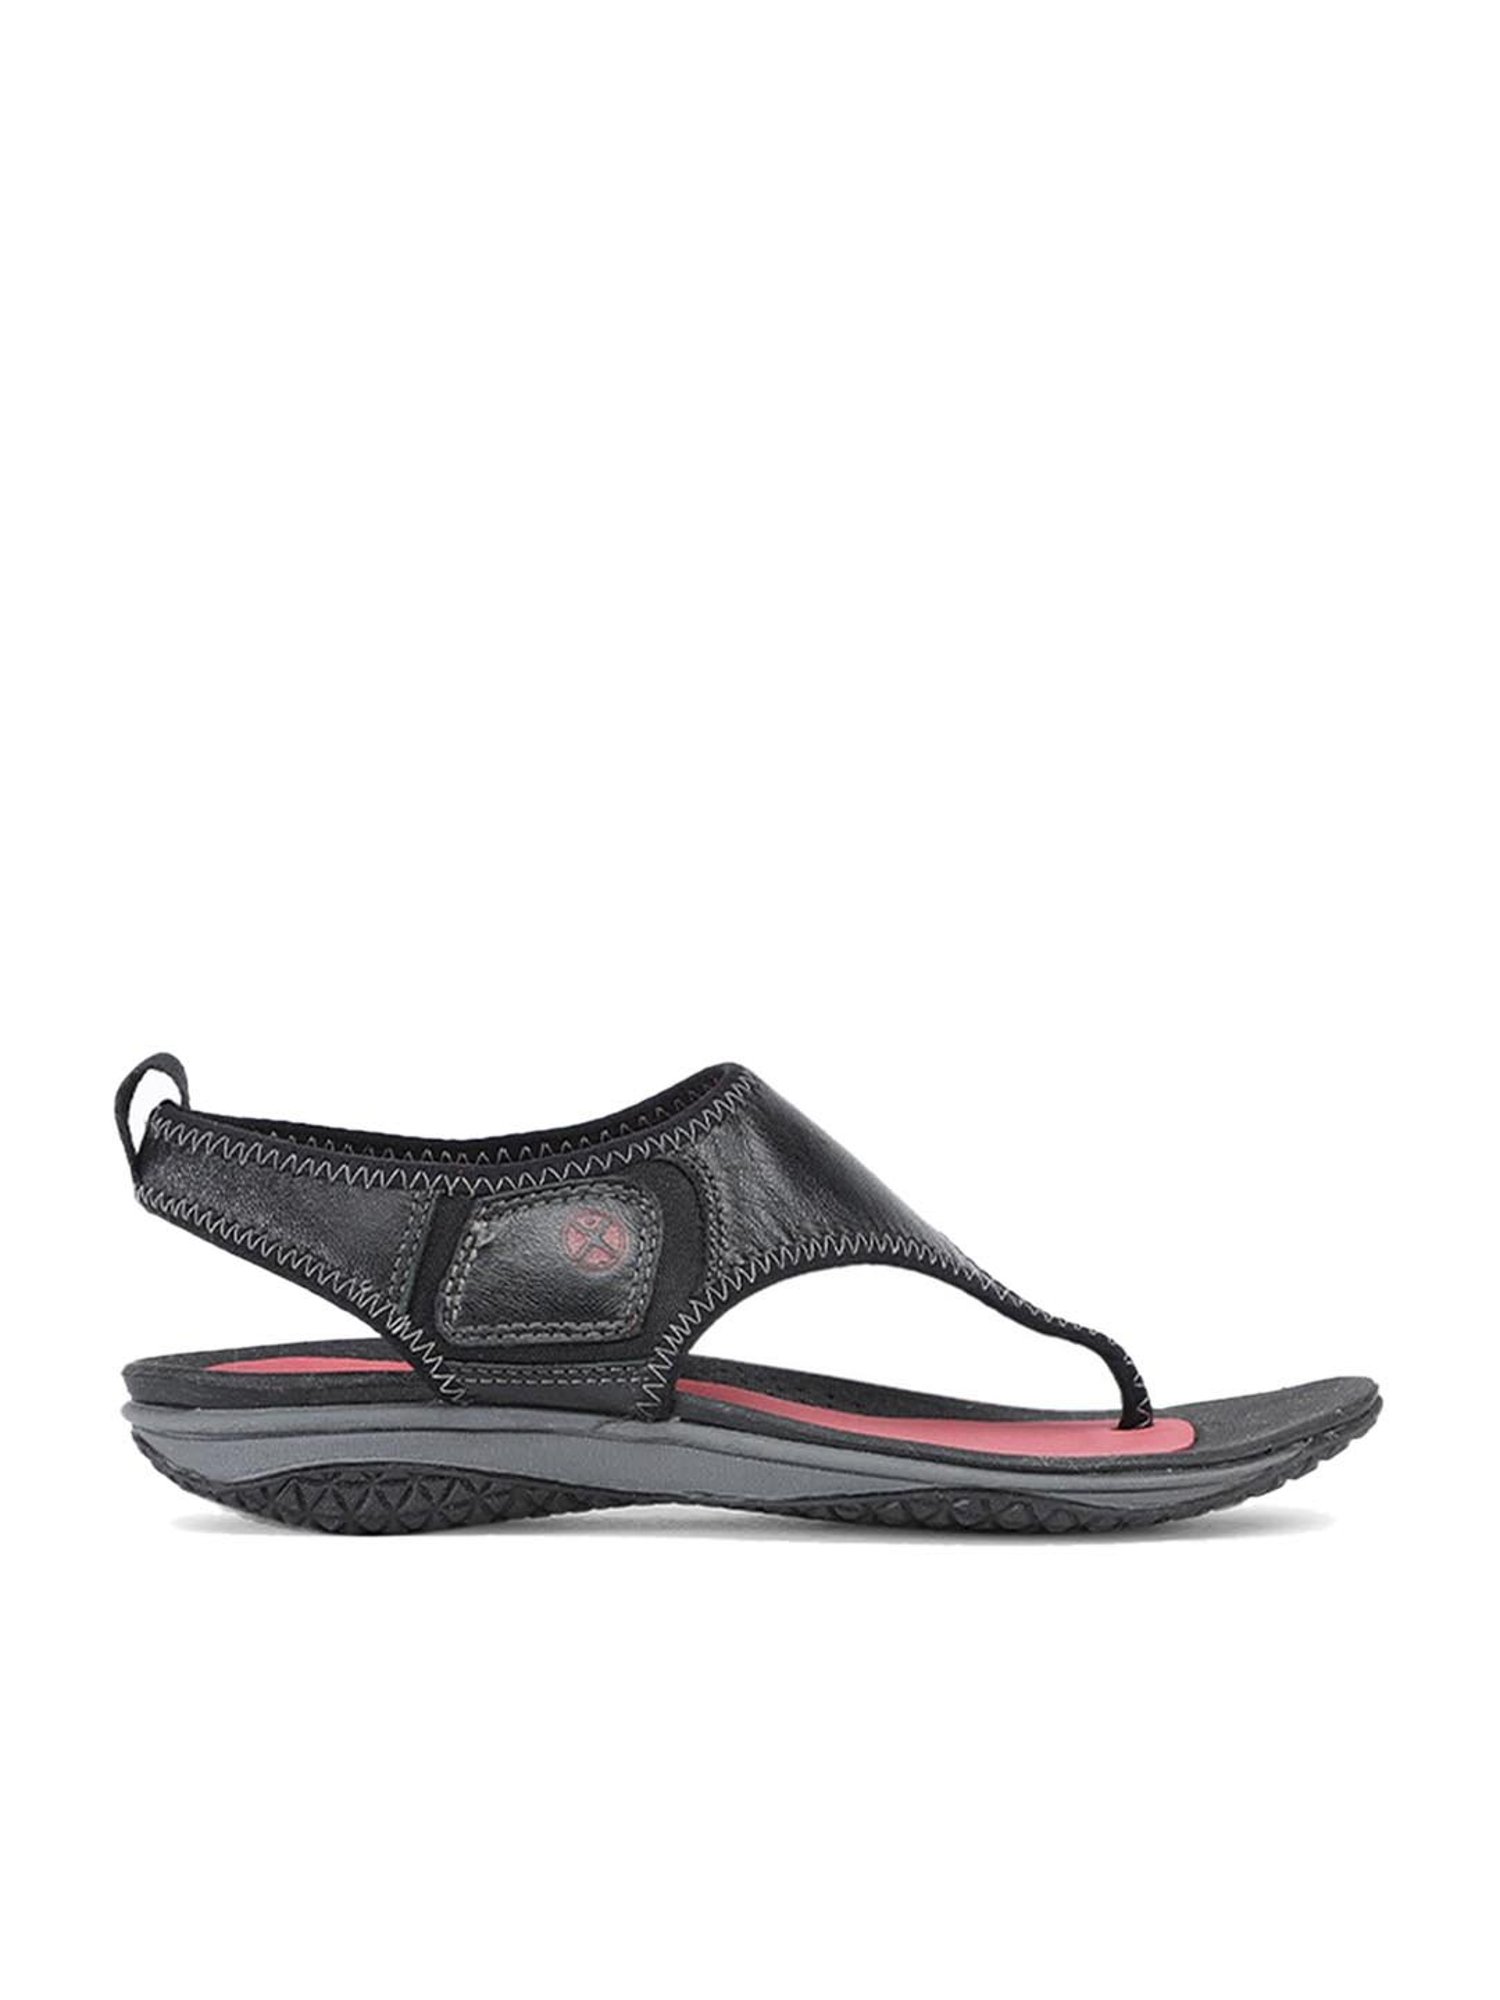 Buy Hush Puppies Genuine Leather Flip Flops at Redfynd